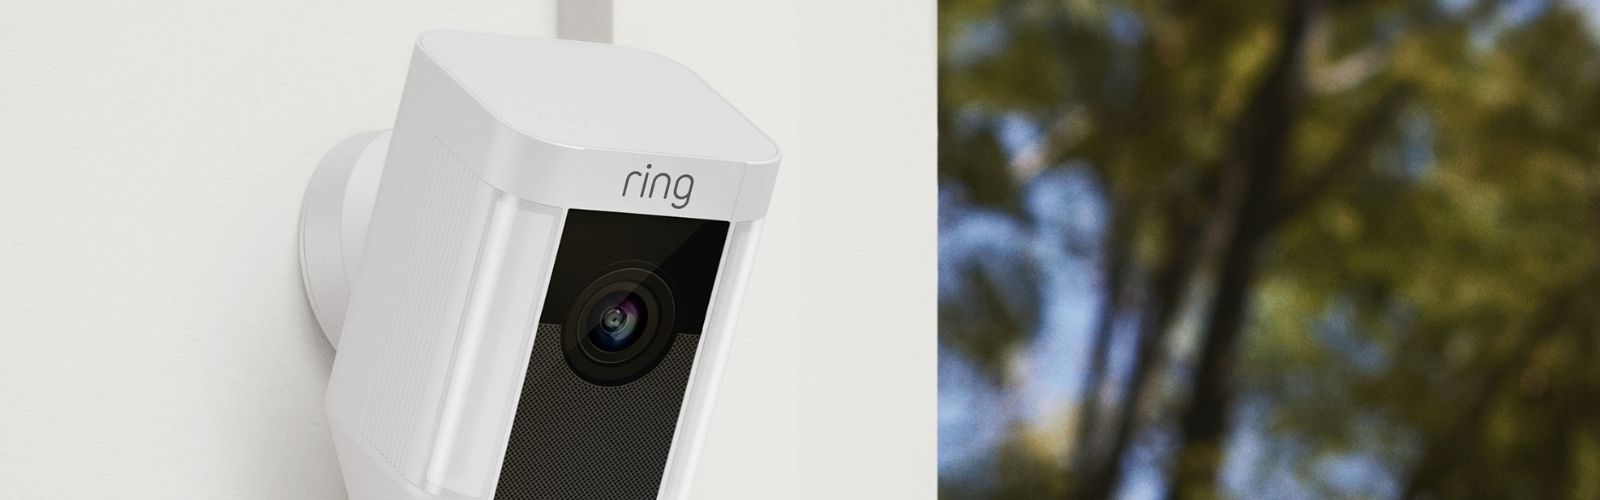 best place to buy ring cameras